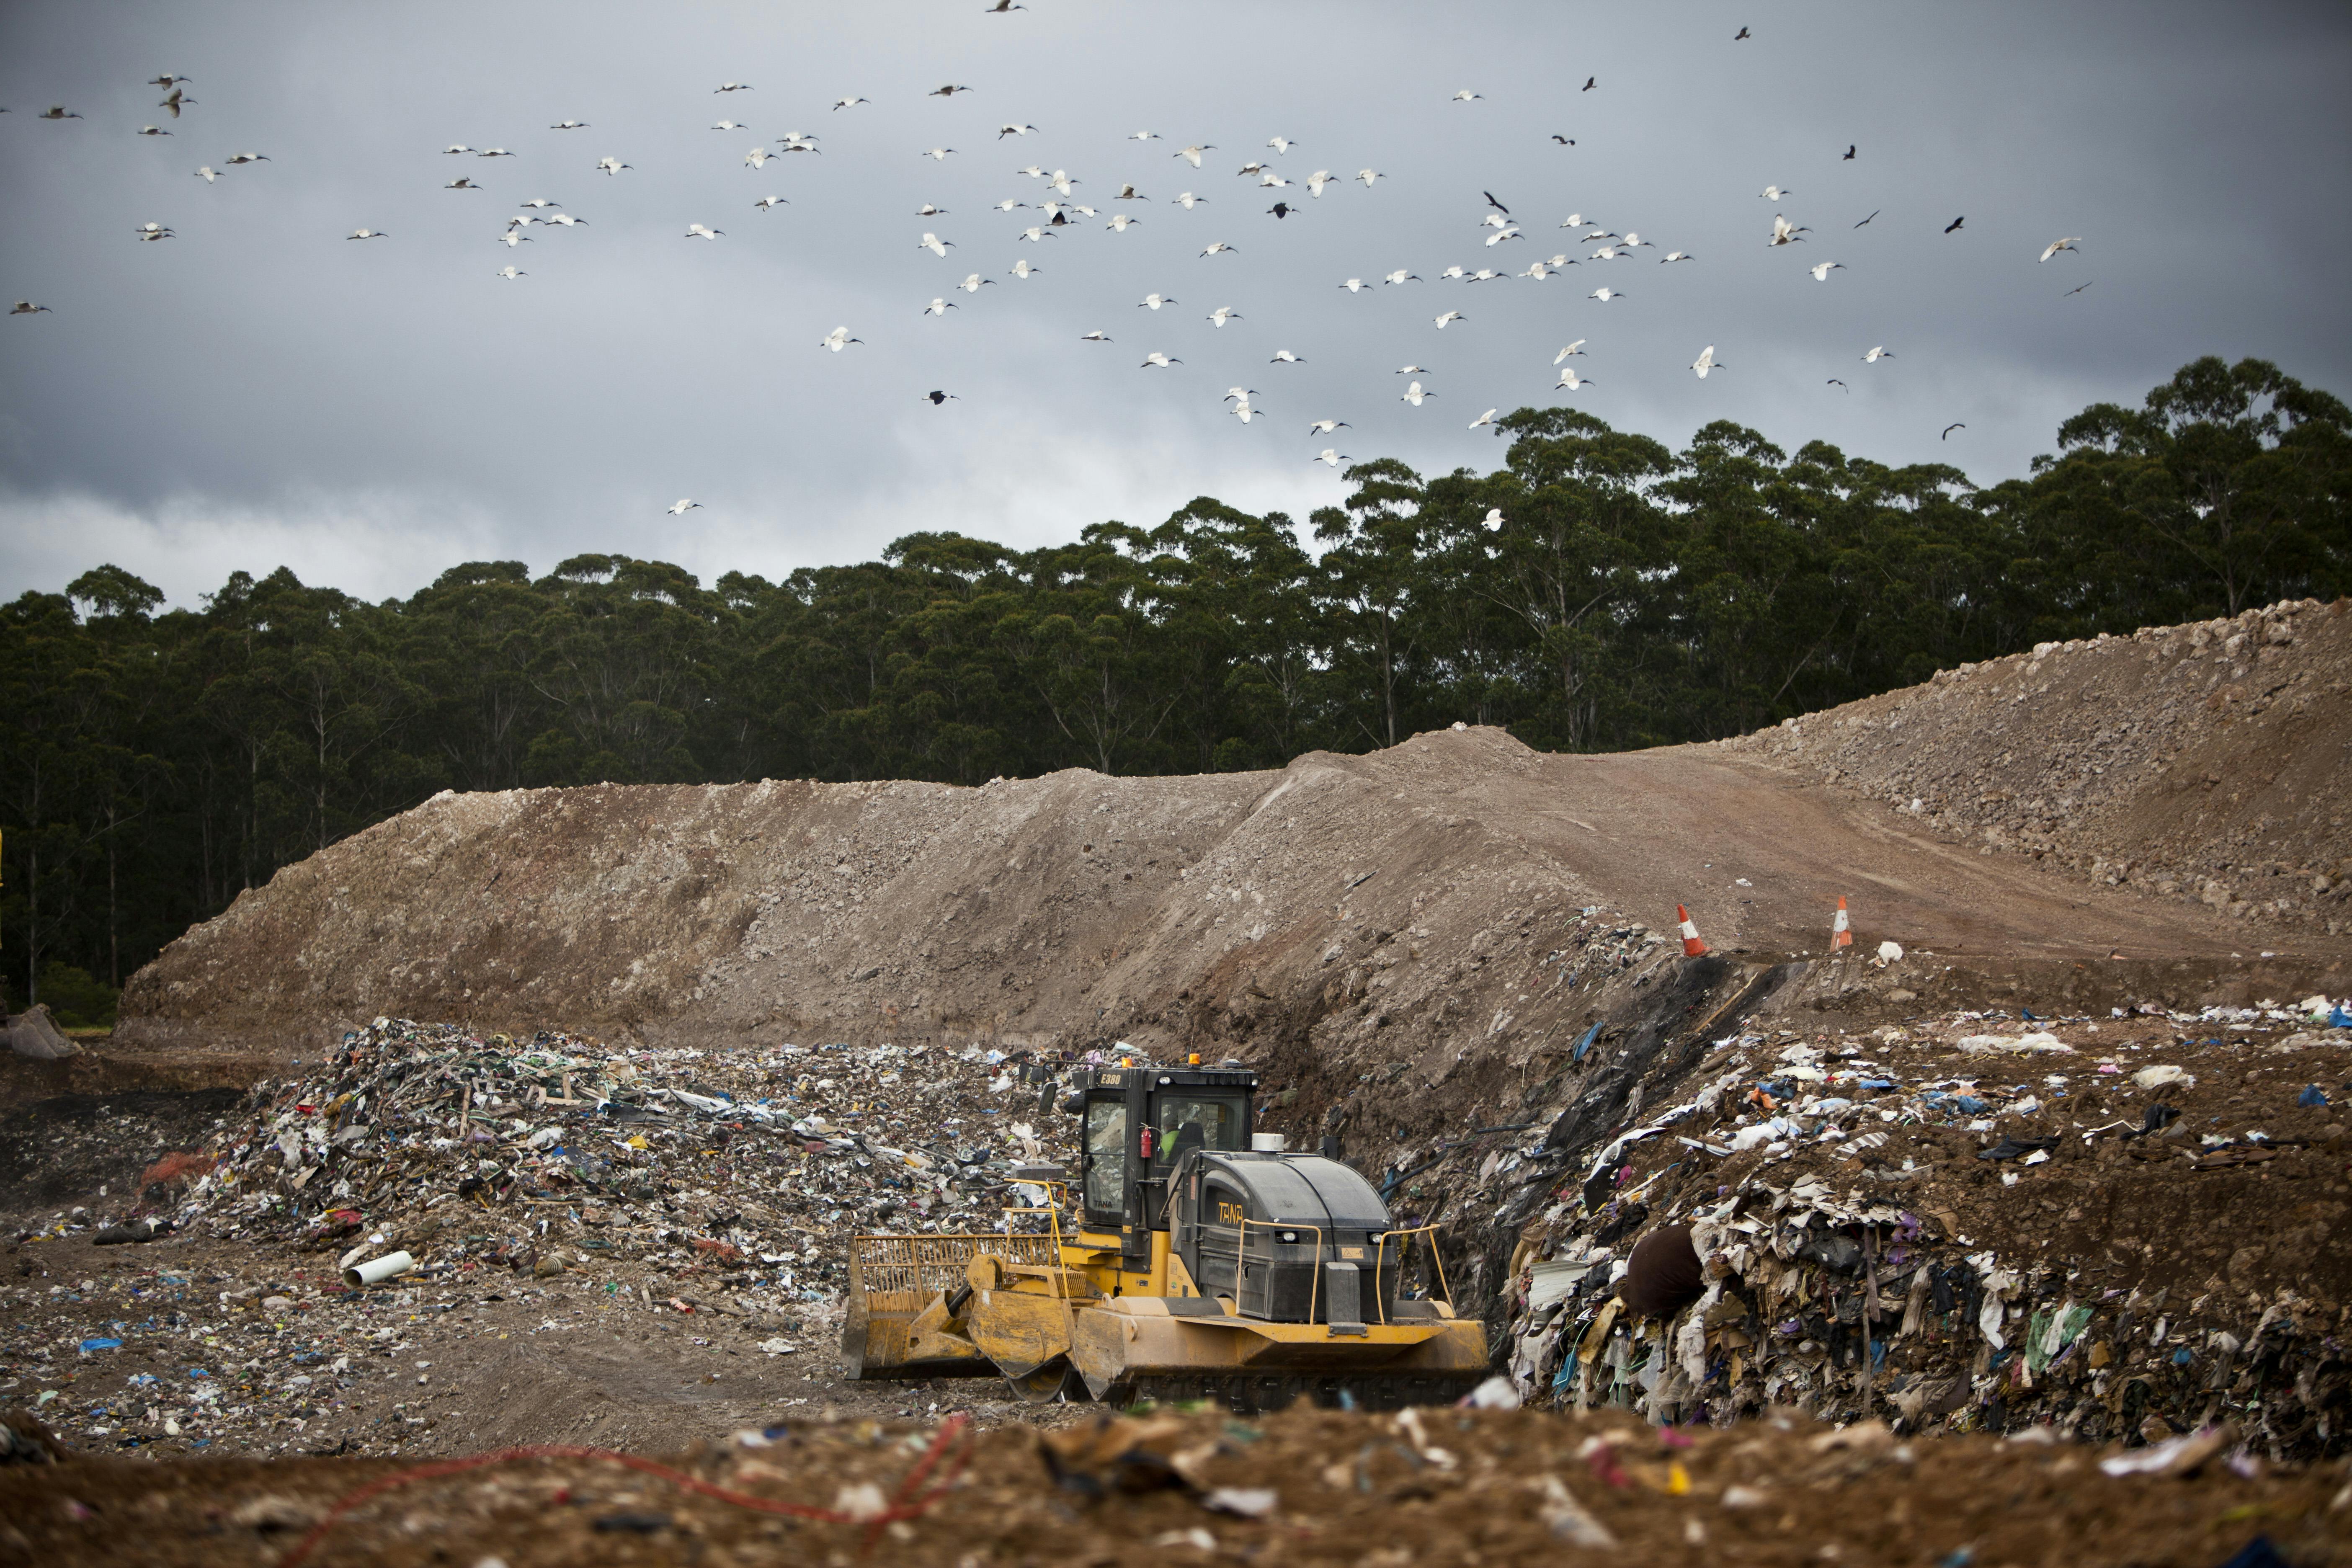 Landfill And Compactor